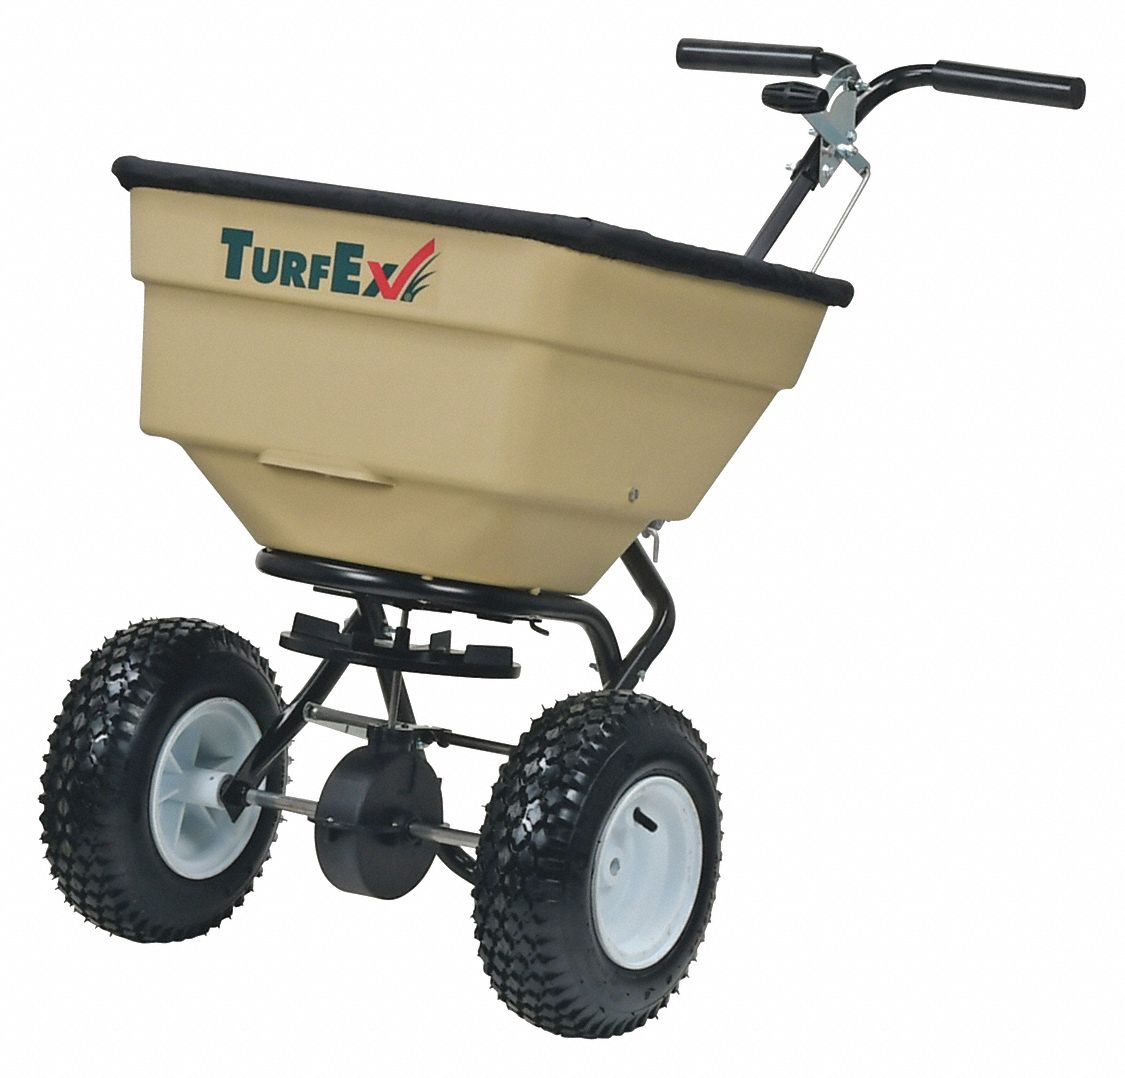 Spreader: 100 lb Capacity, Pneumatic, Broadcast, Manual Lever, Up to 12 ft